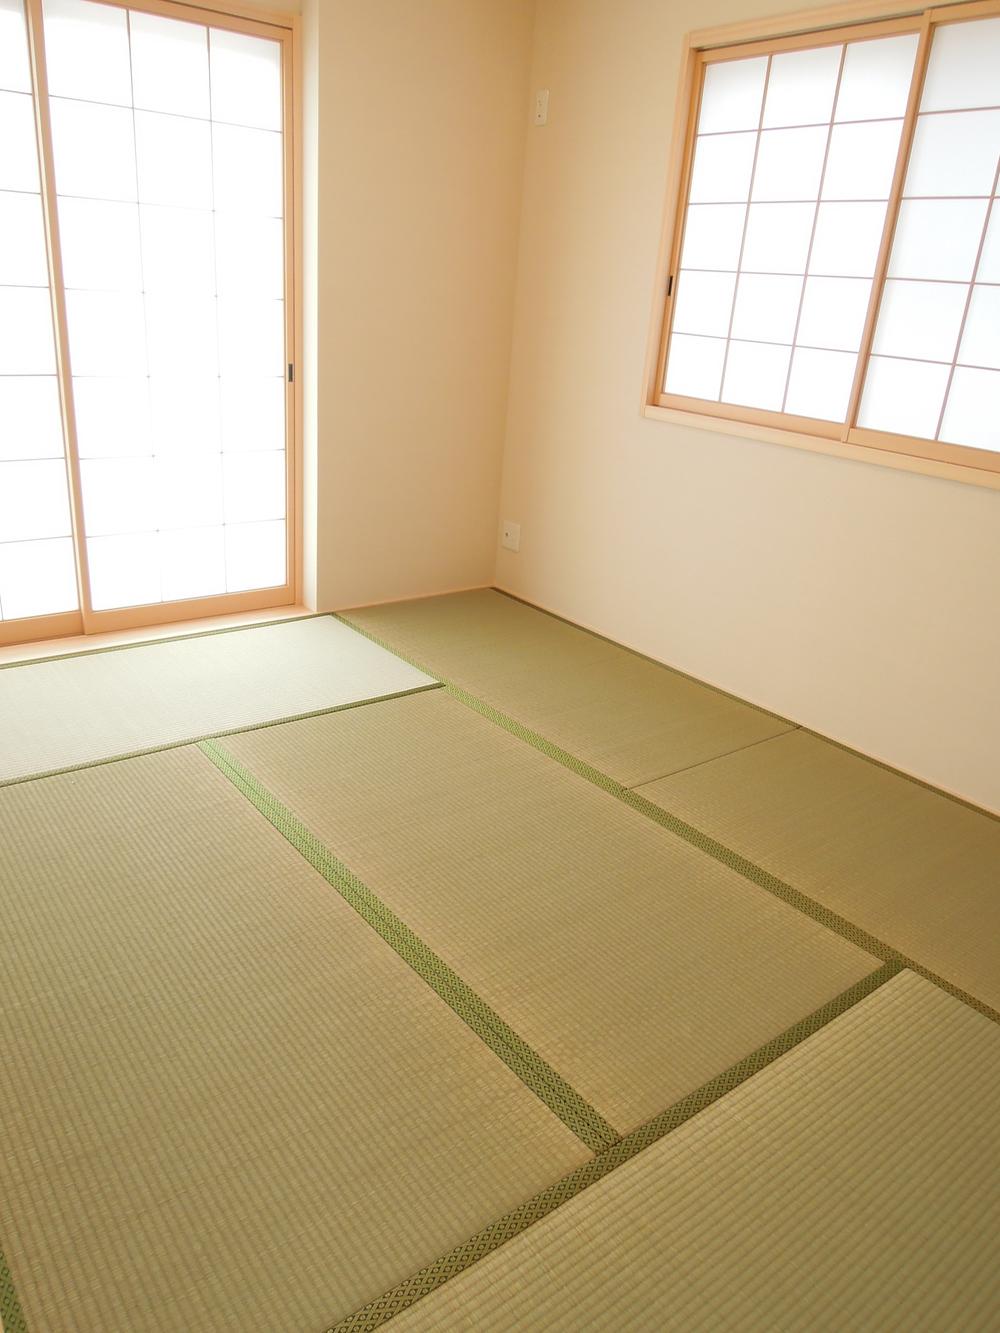 Same specifications photos (Other introspection). First floor Japanese-style room with a calm